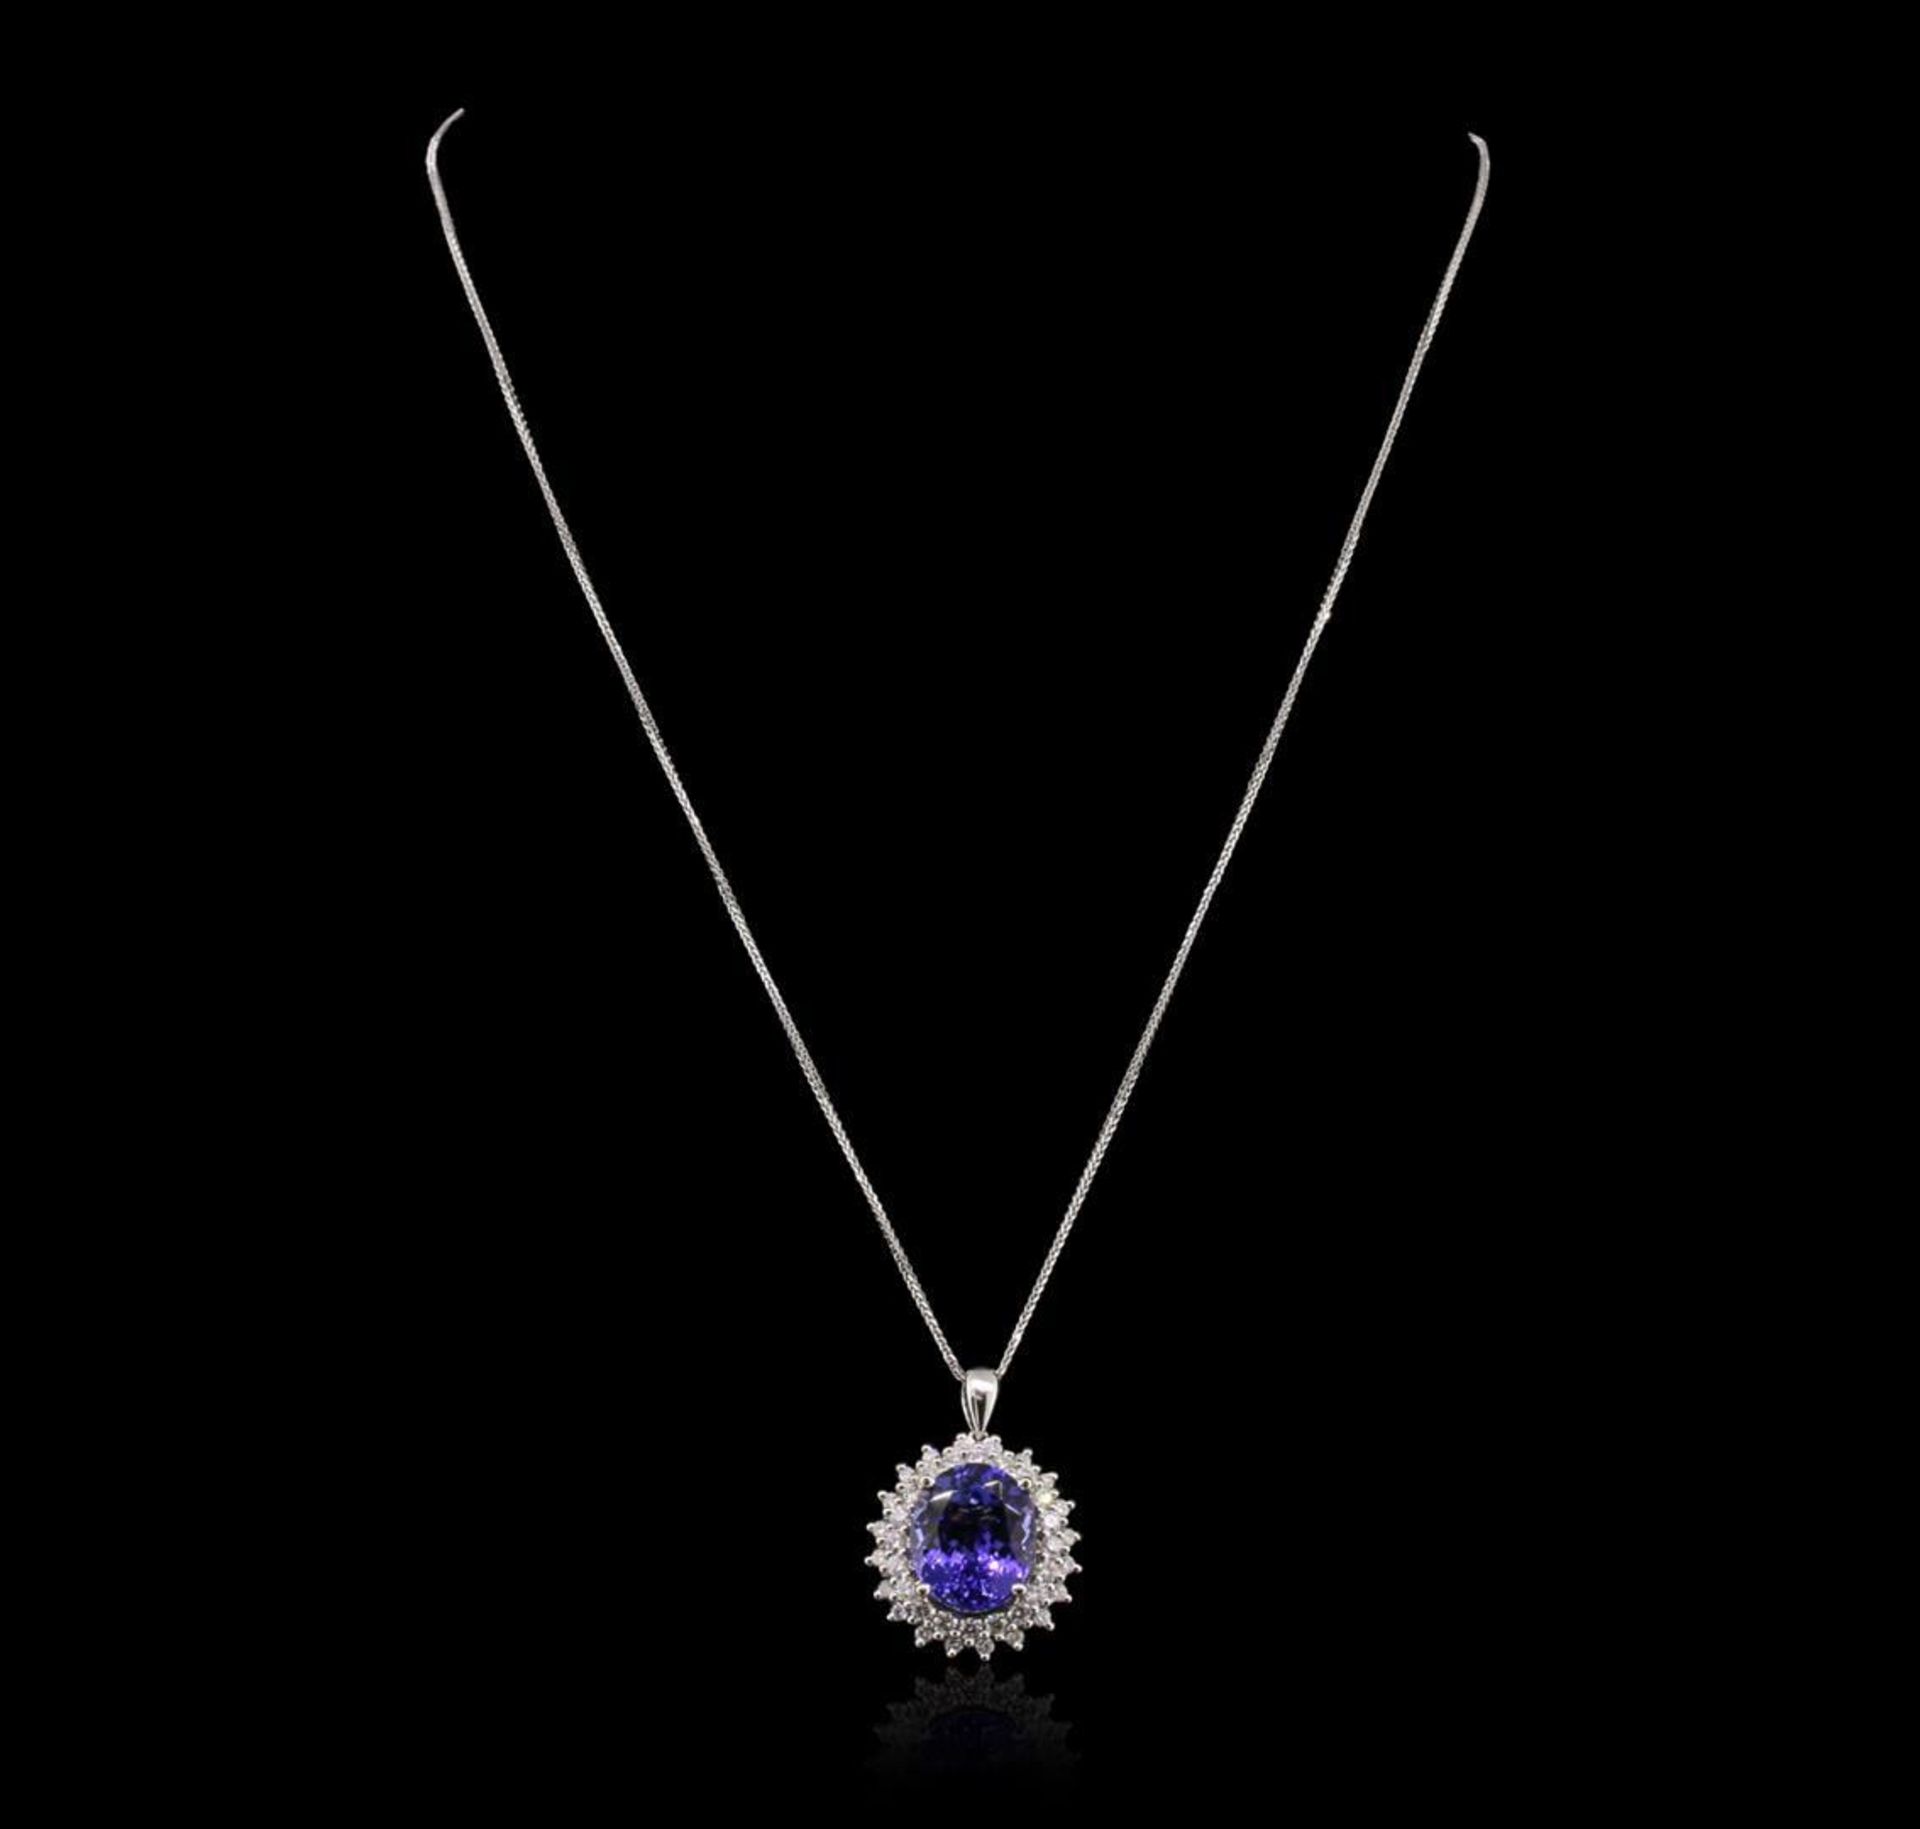 14KT White Gold 9.14 ctw Tanzanite and Diamond Pendant With Chain - Image 2 of 3